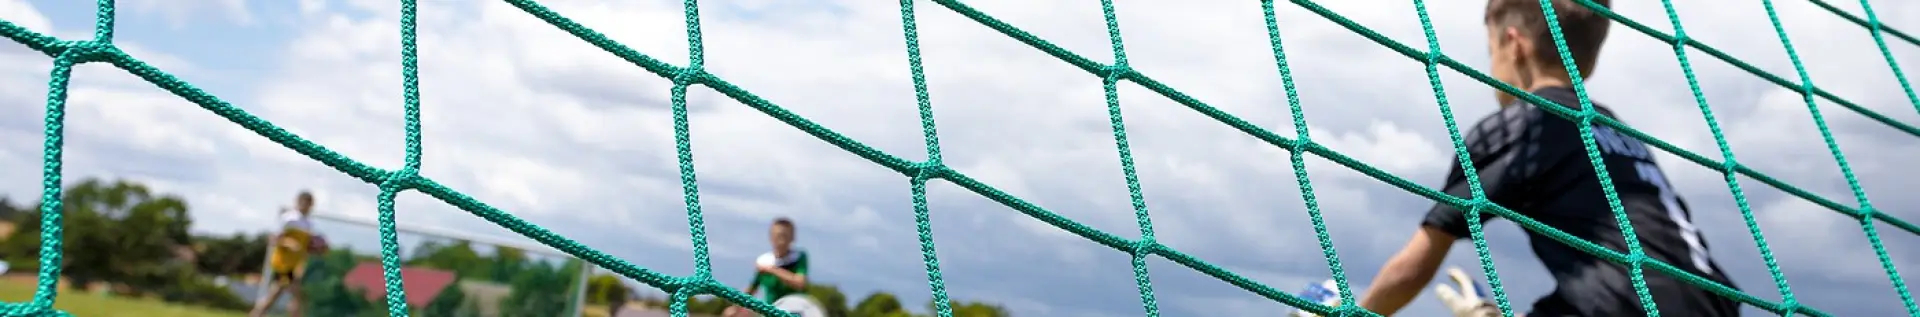 Firecrackers safety nets